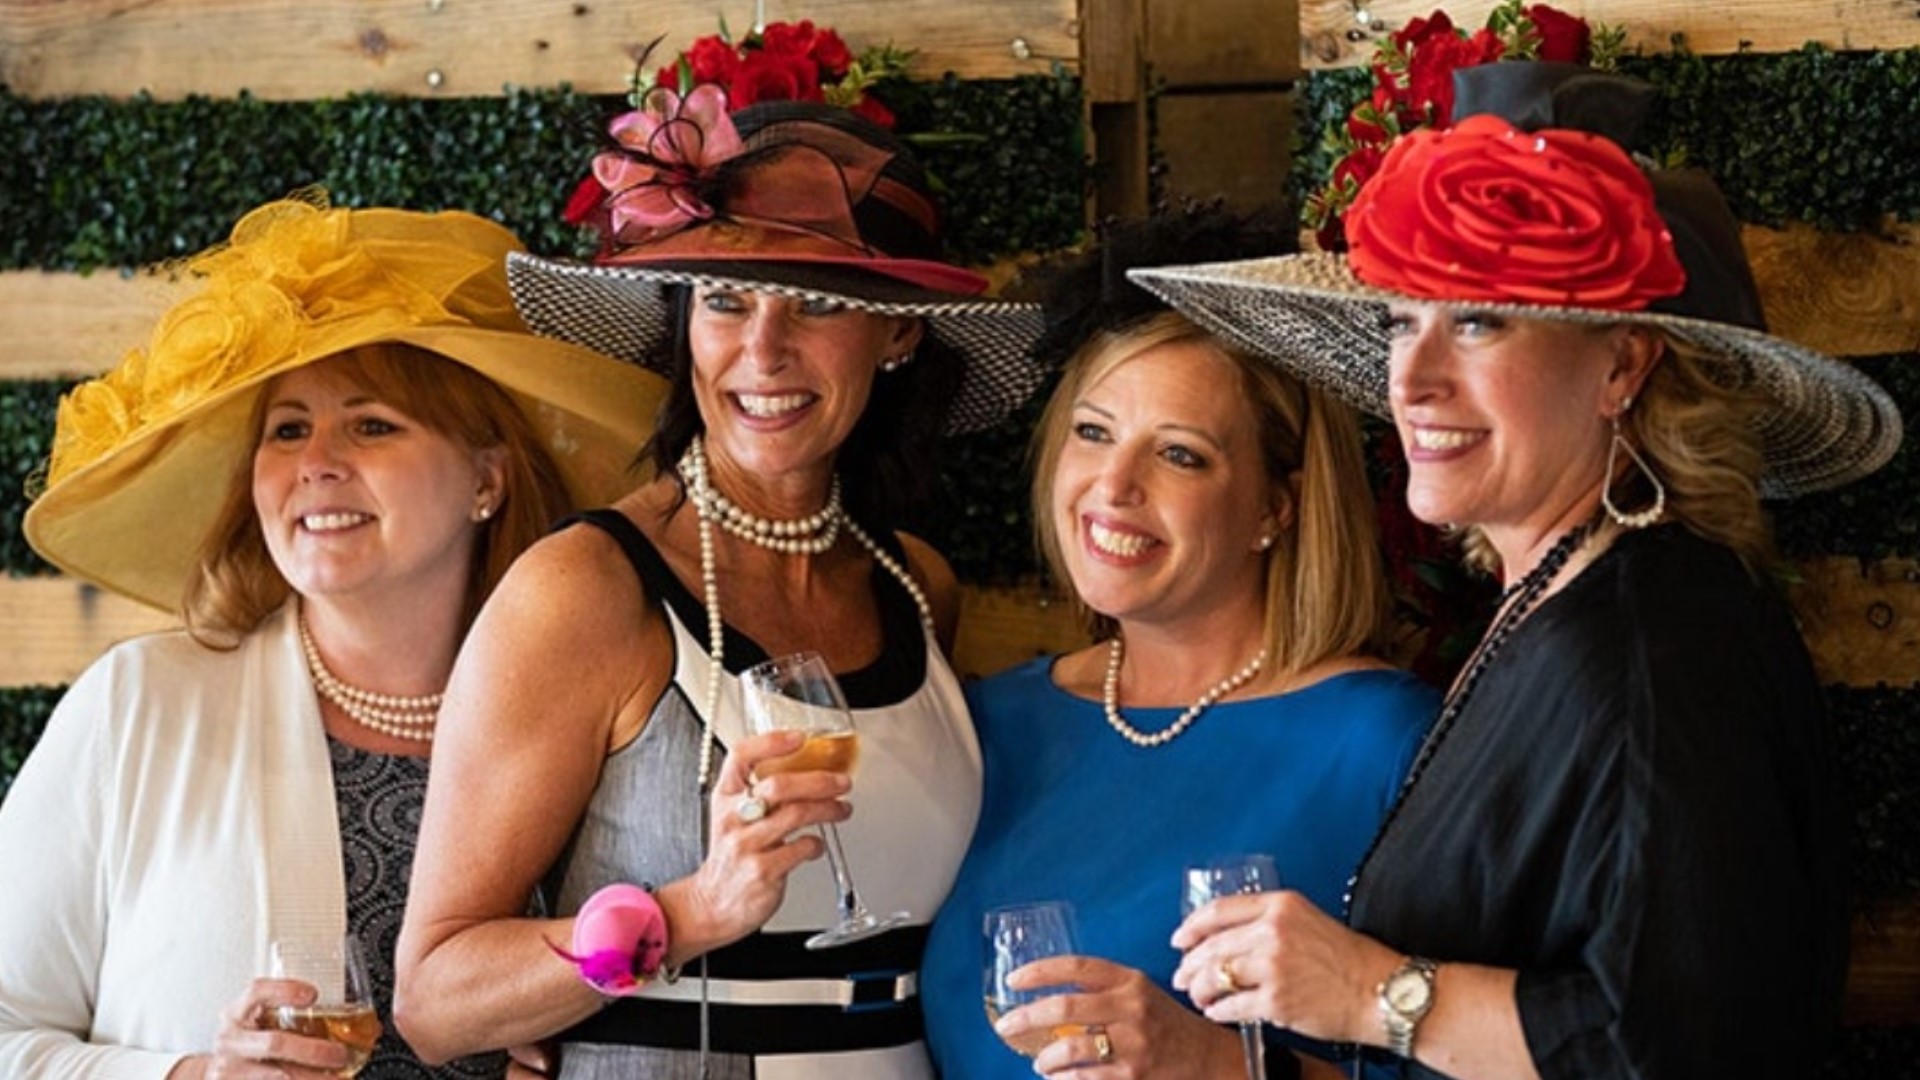 Cheer on the Kentucky Derby in wine country, gift her a spa certificate with the best view in the city,  enjoy live music or a free cocktail tasting.